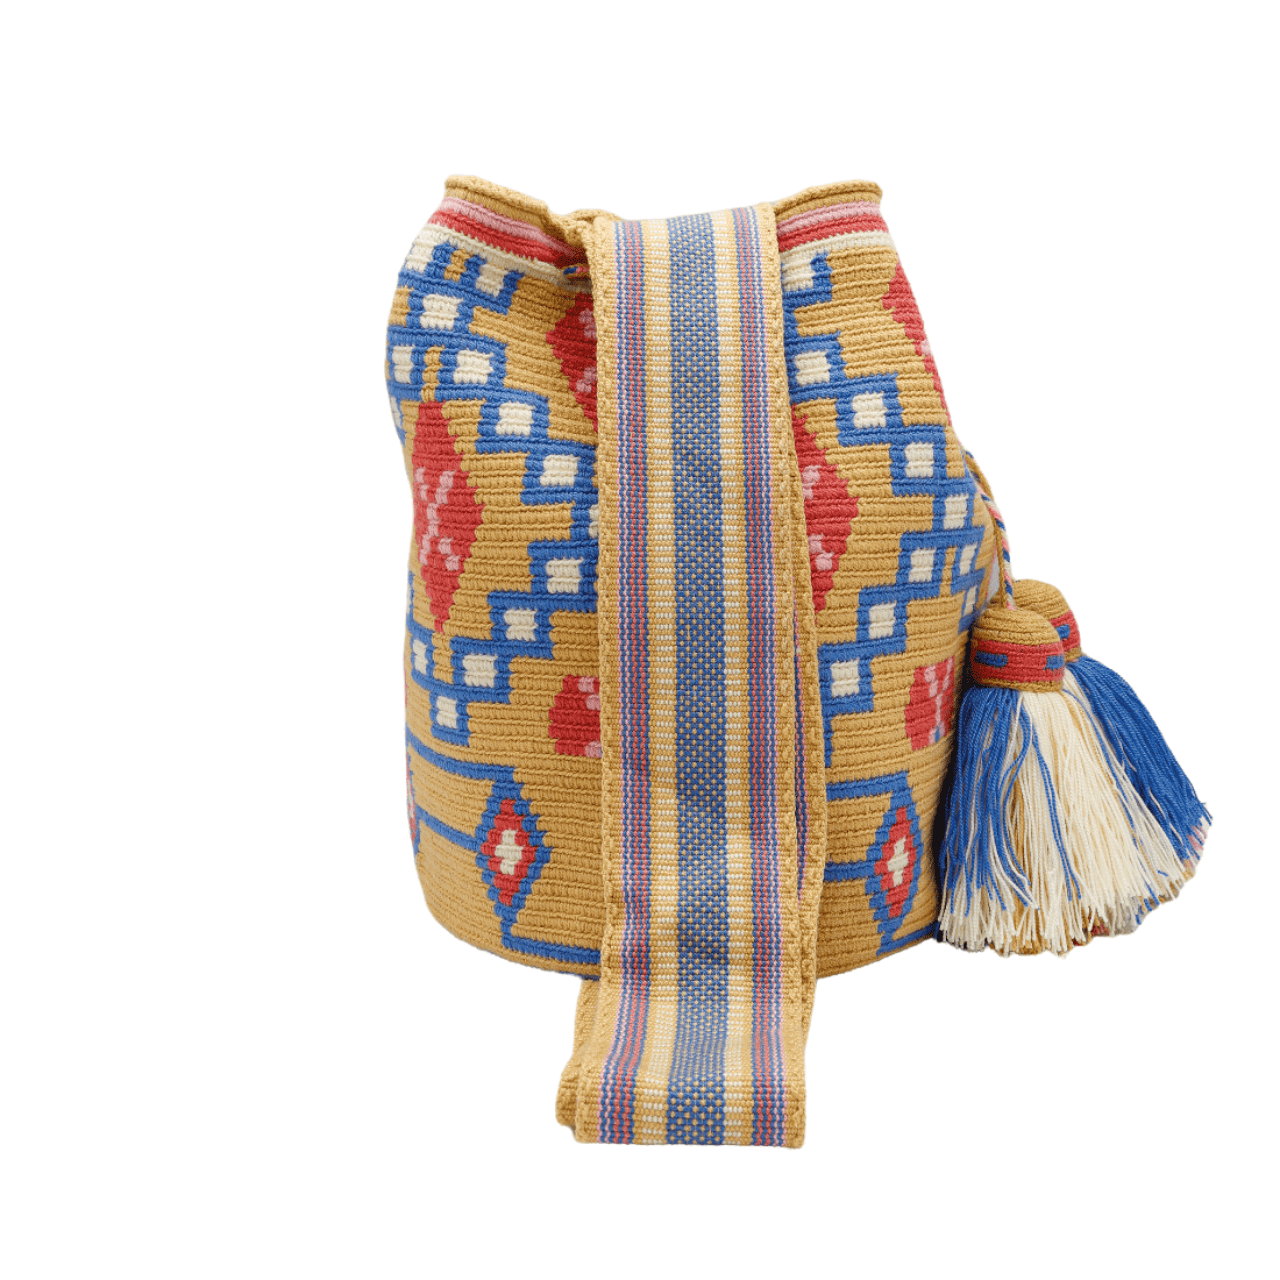 Mari Wayuu Bag: Vanilla, blues, and pinks in a handcrafted crochet beauty for everyday chic